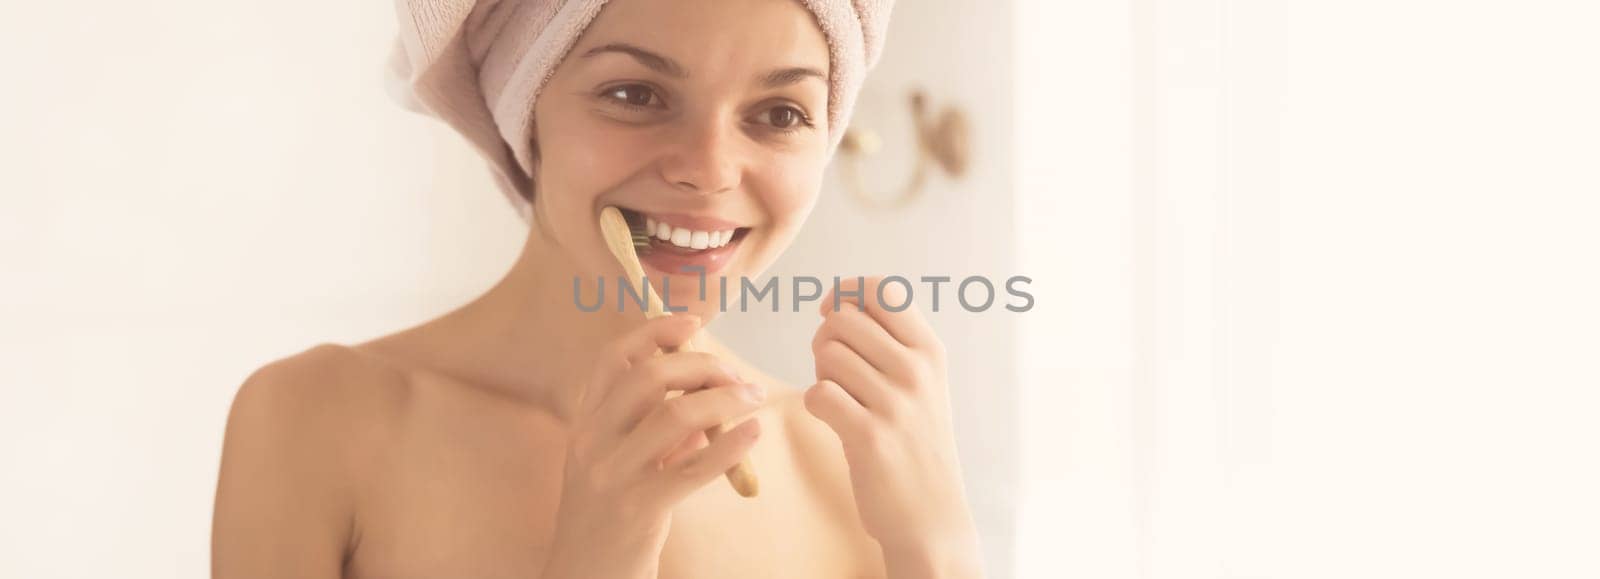 A young girl brushes her teeth near the mirror after relaxing in the bathroom, the woman is wrapped in a towel and takes care of the health and beauty of her body and teeth, gums.